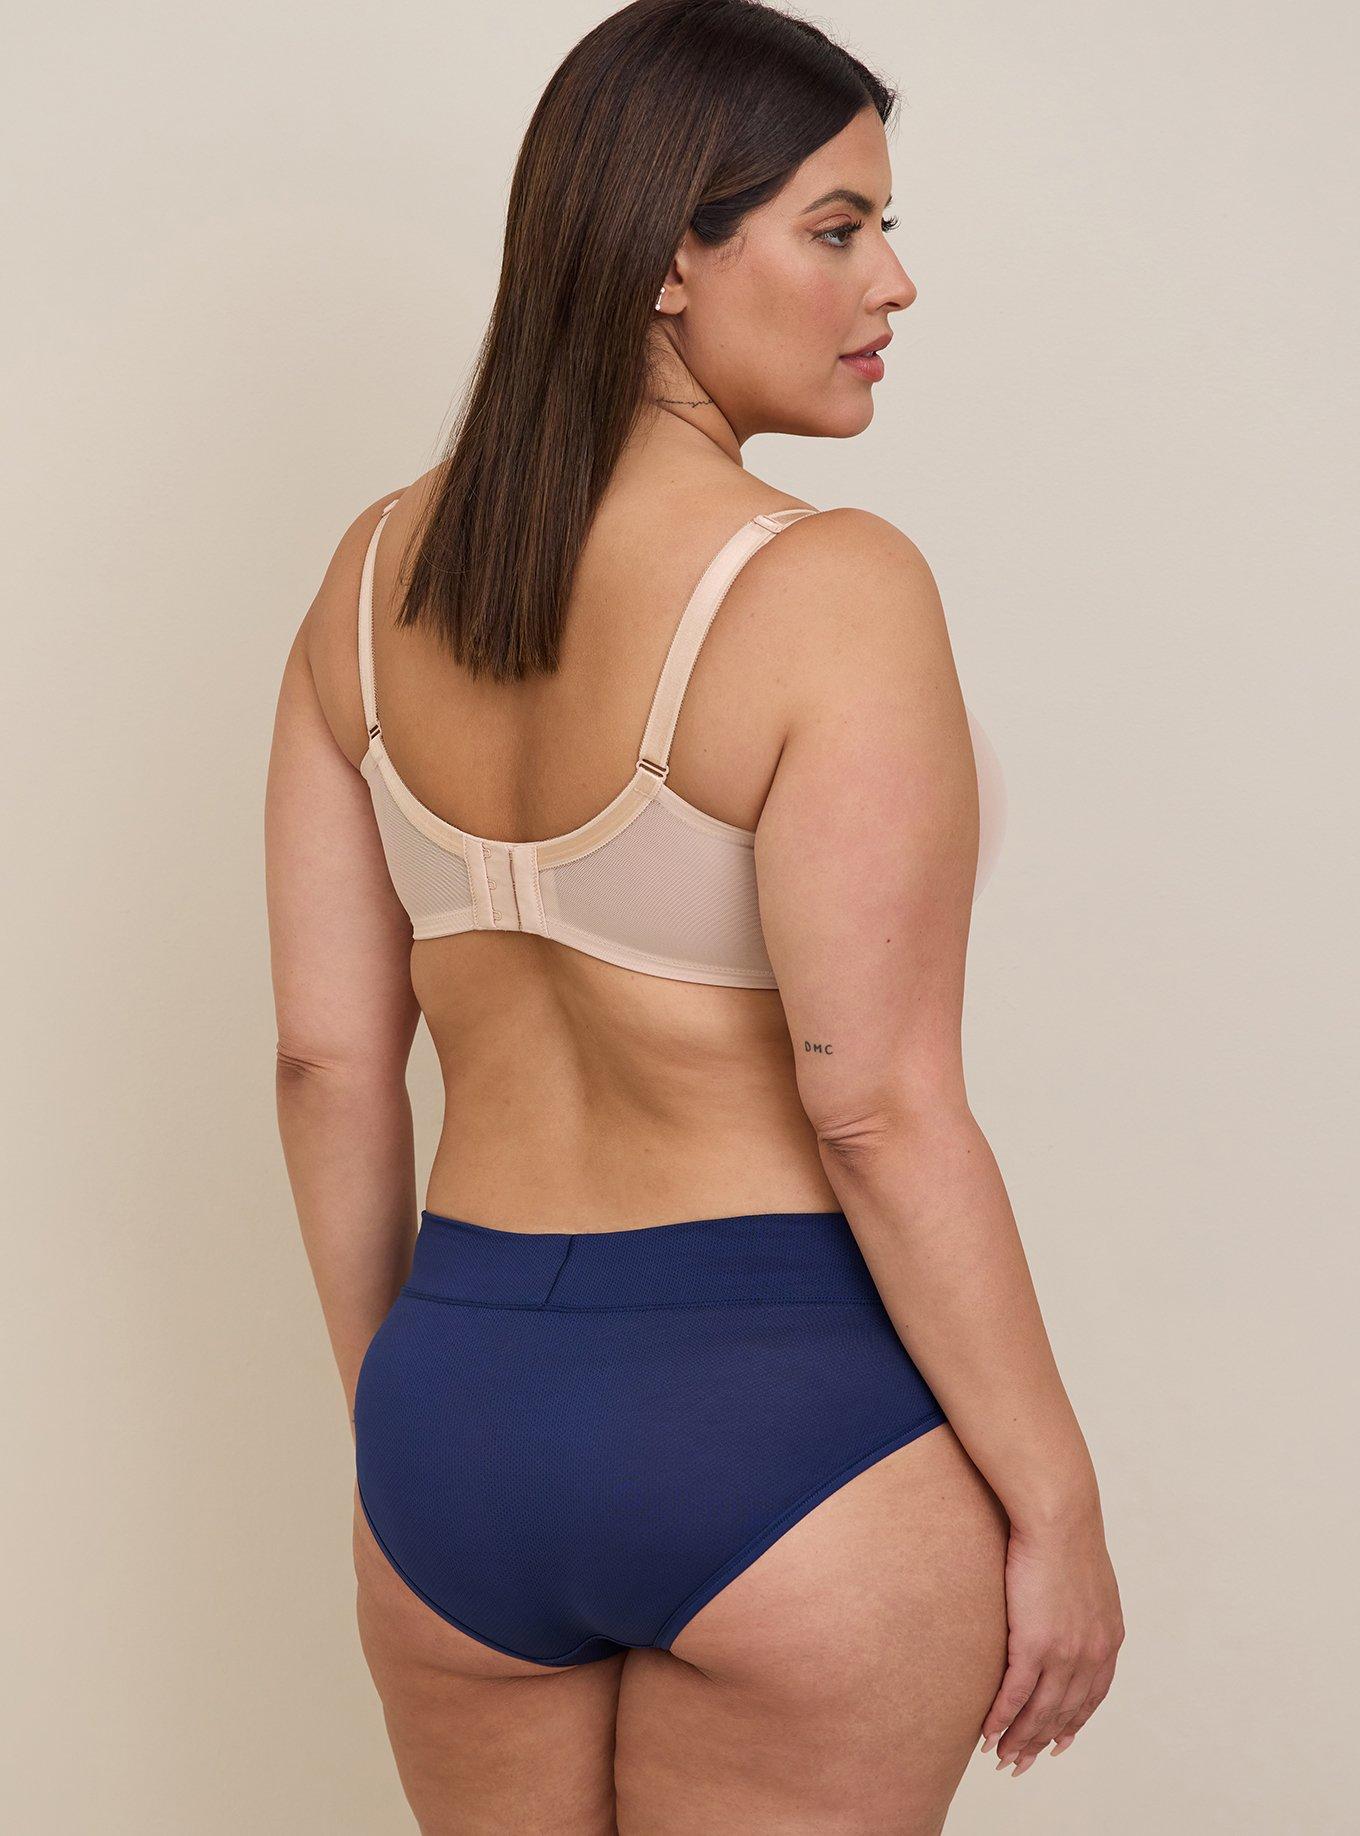 Comfort Bras Try on Haul from Addition Elle (Plus-Size Lingerie